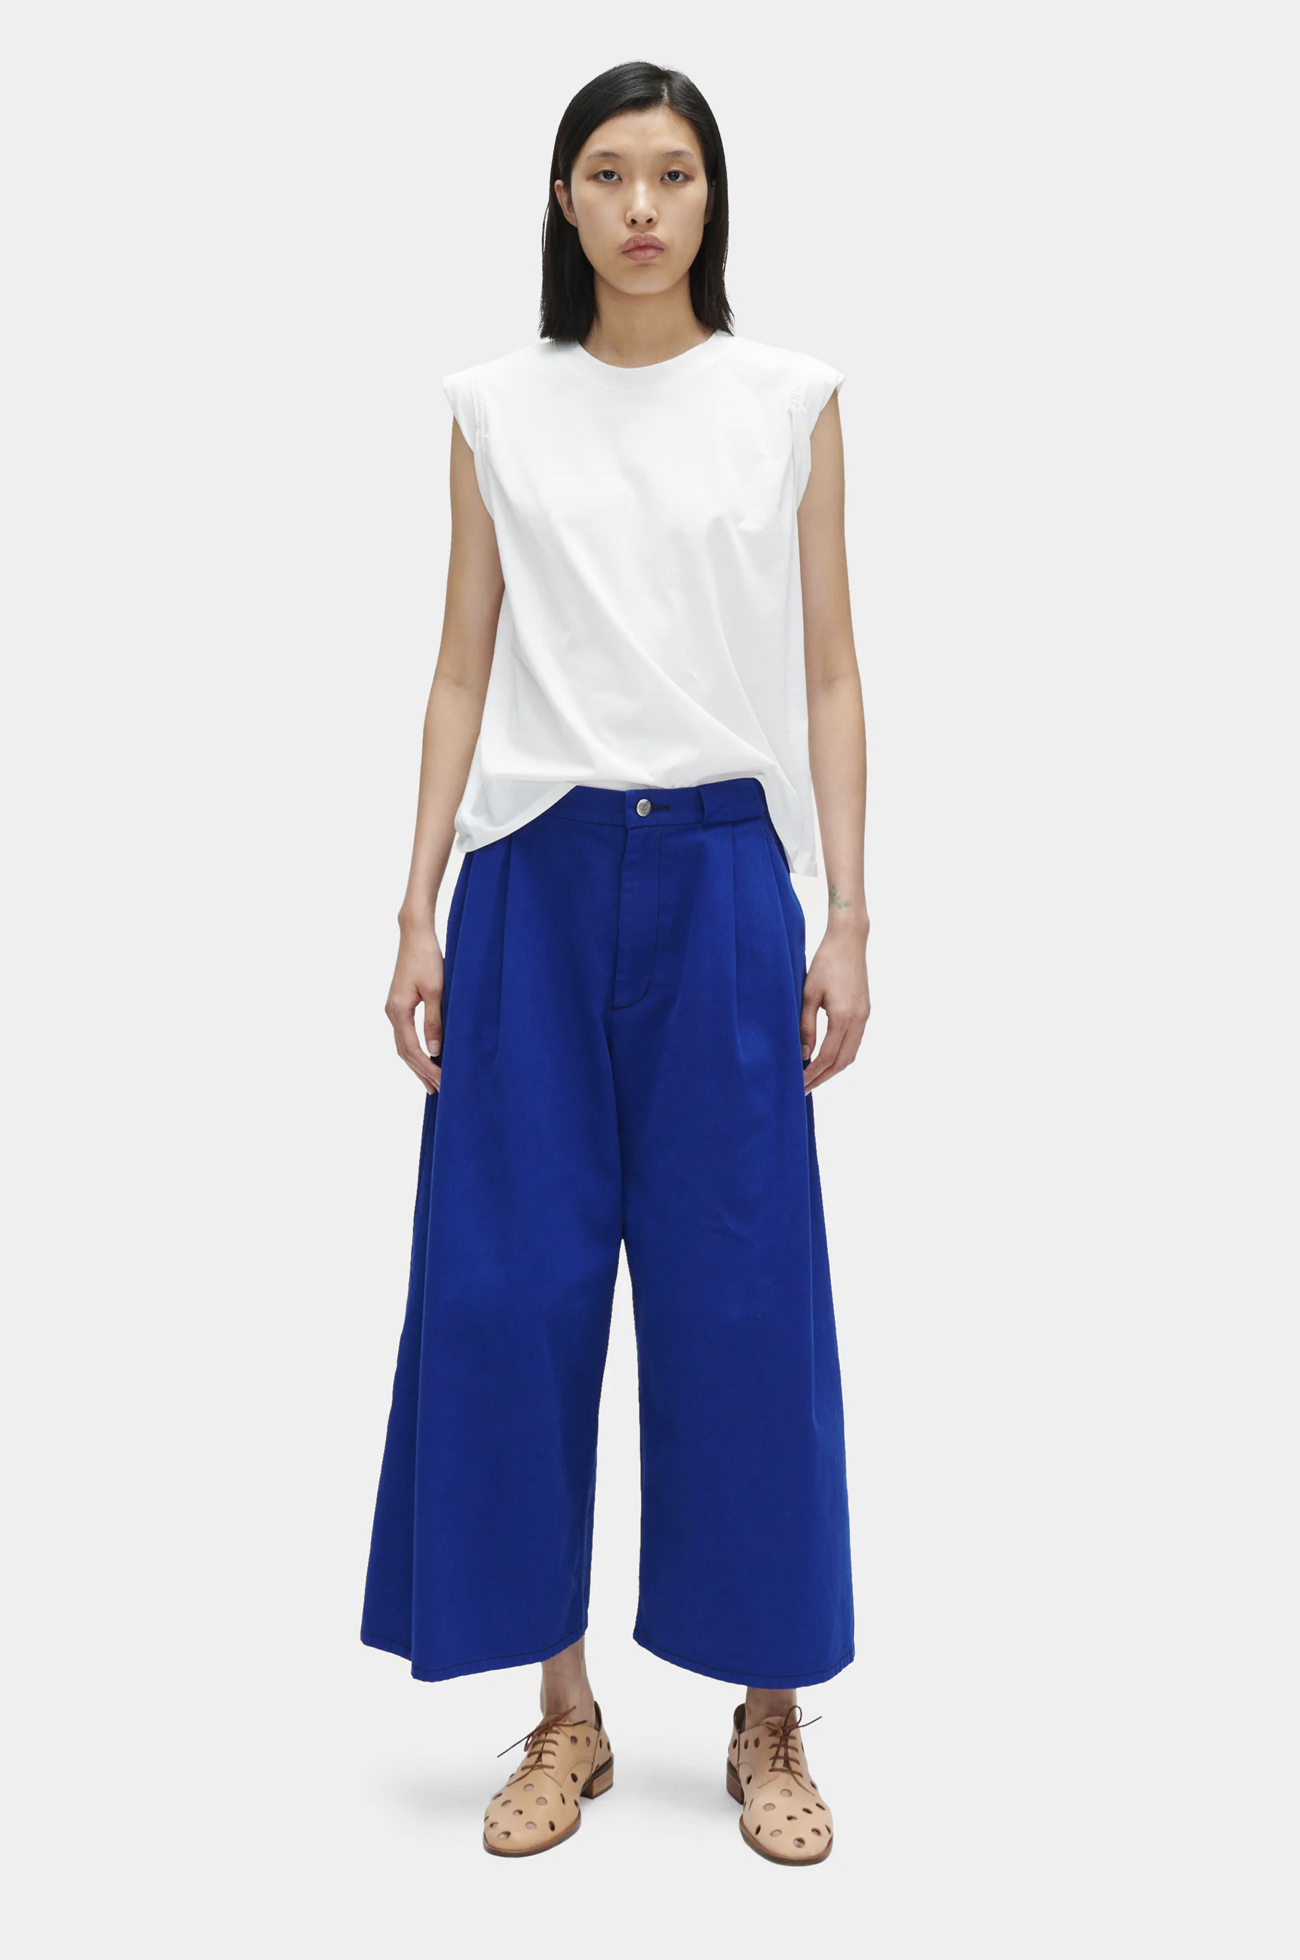 Miles Tee in White by Rachel Comey 